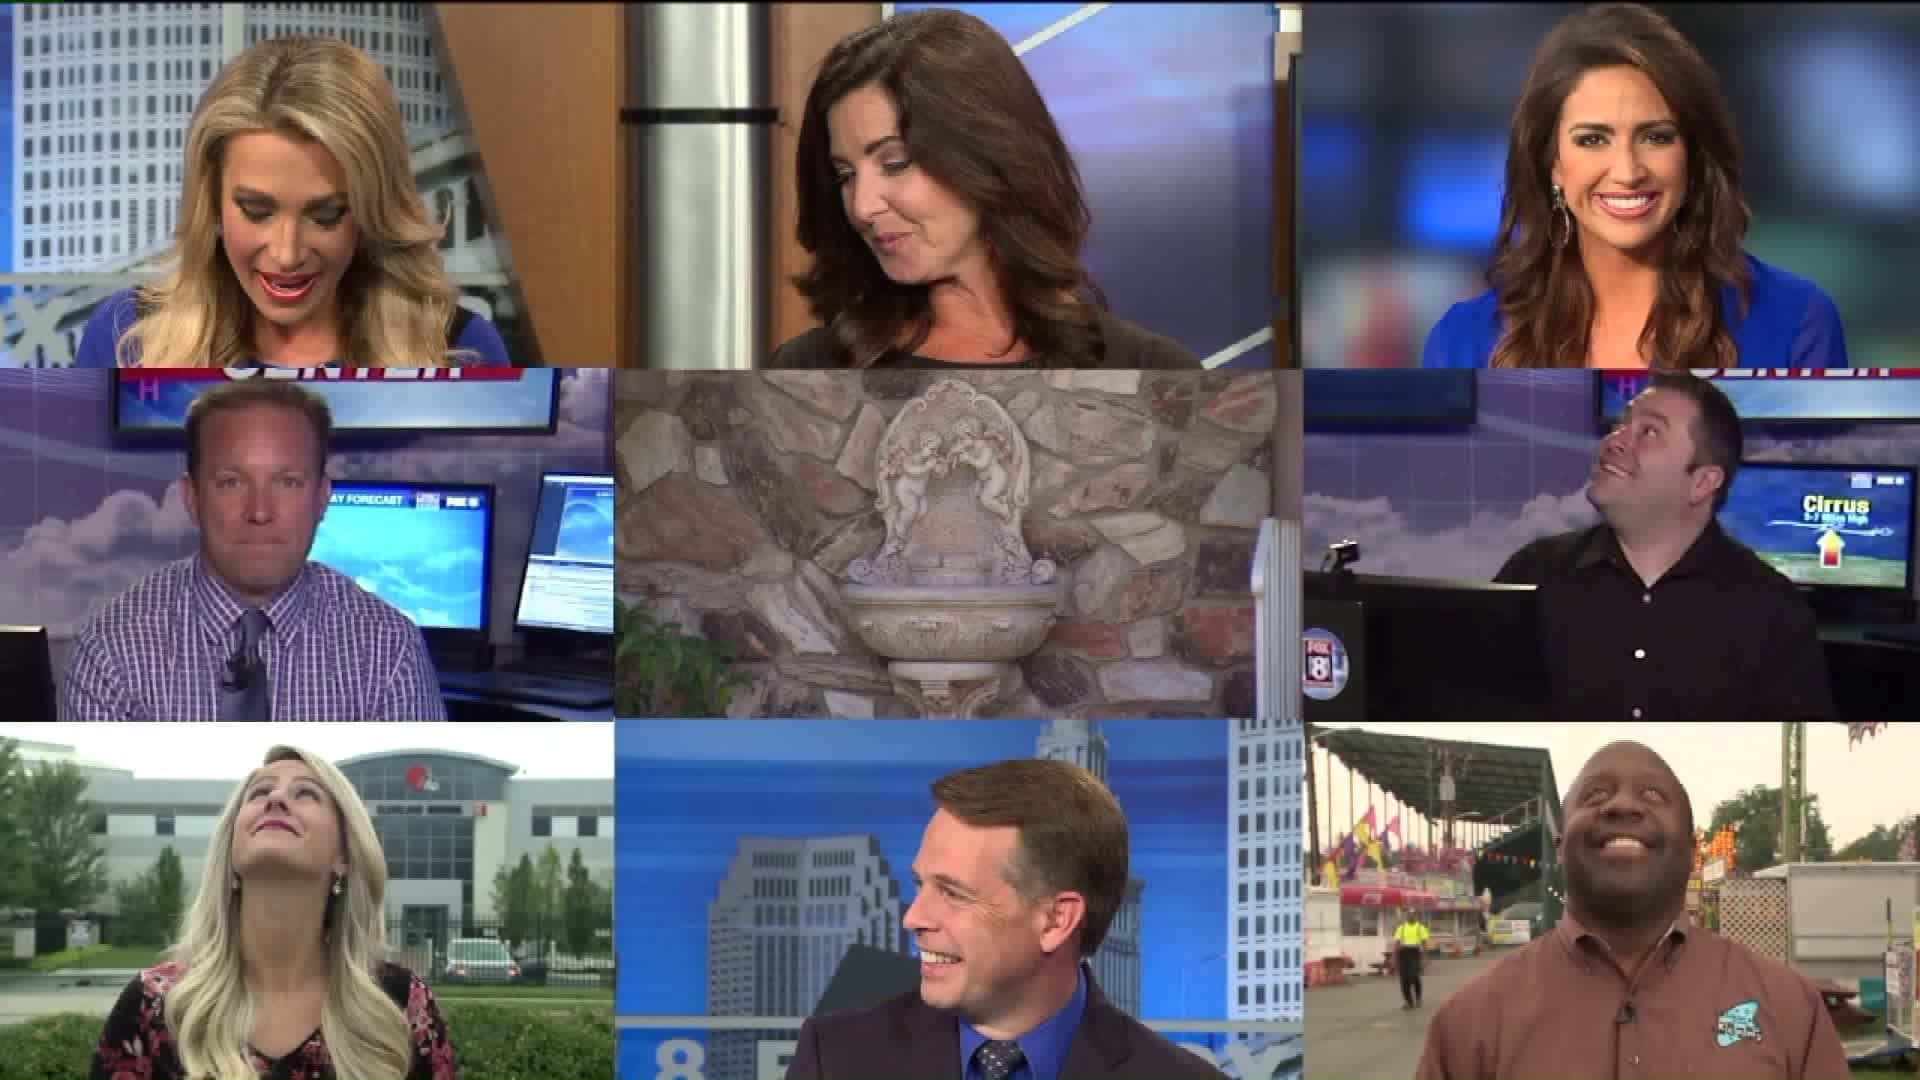 A Collage Of People On Television Wallpaper